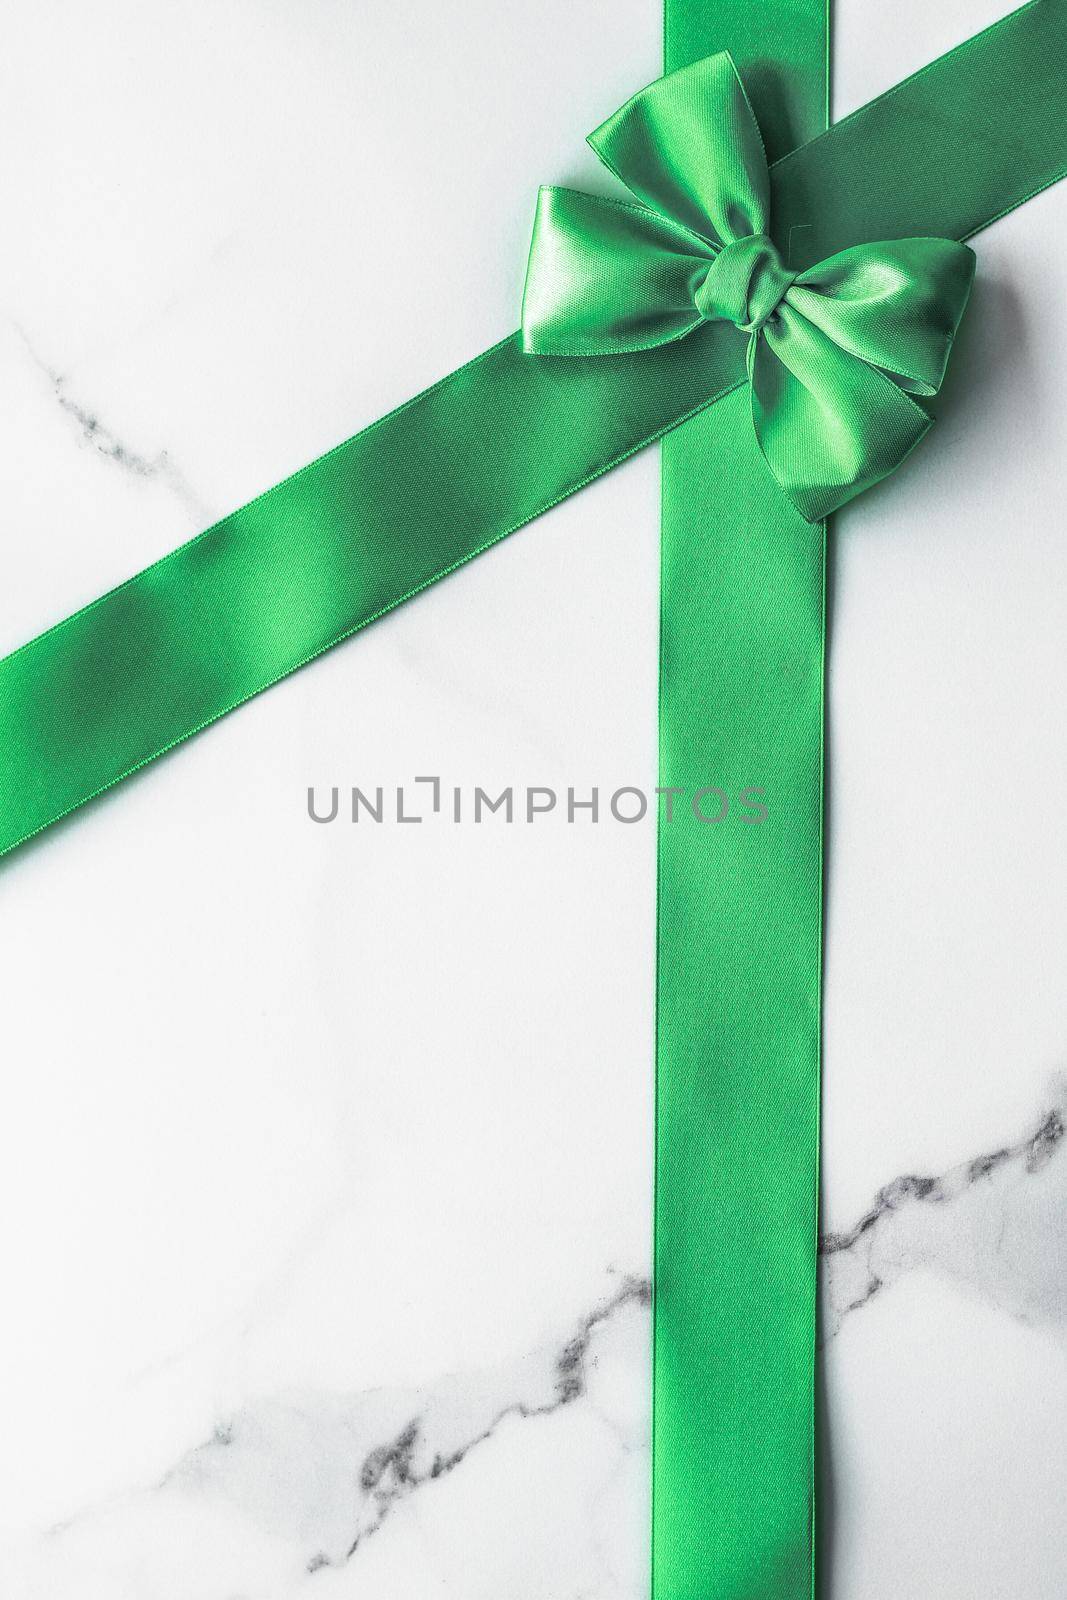 Decorative, birthday and art branding concept - Green silk ribbon and bow on marble background, St Patricks day present or Christmas glamour gift decor for luxury digital brand, holiday flatlay design